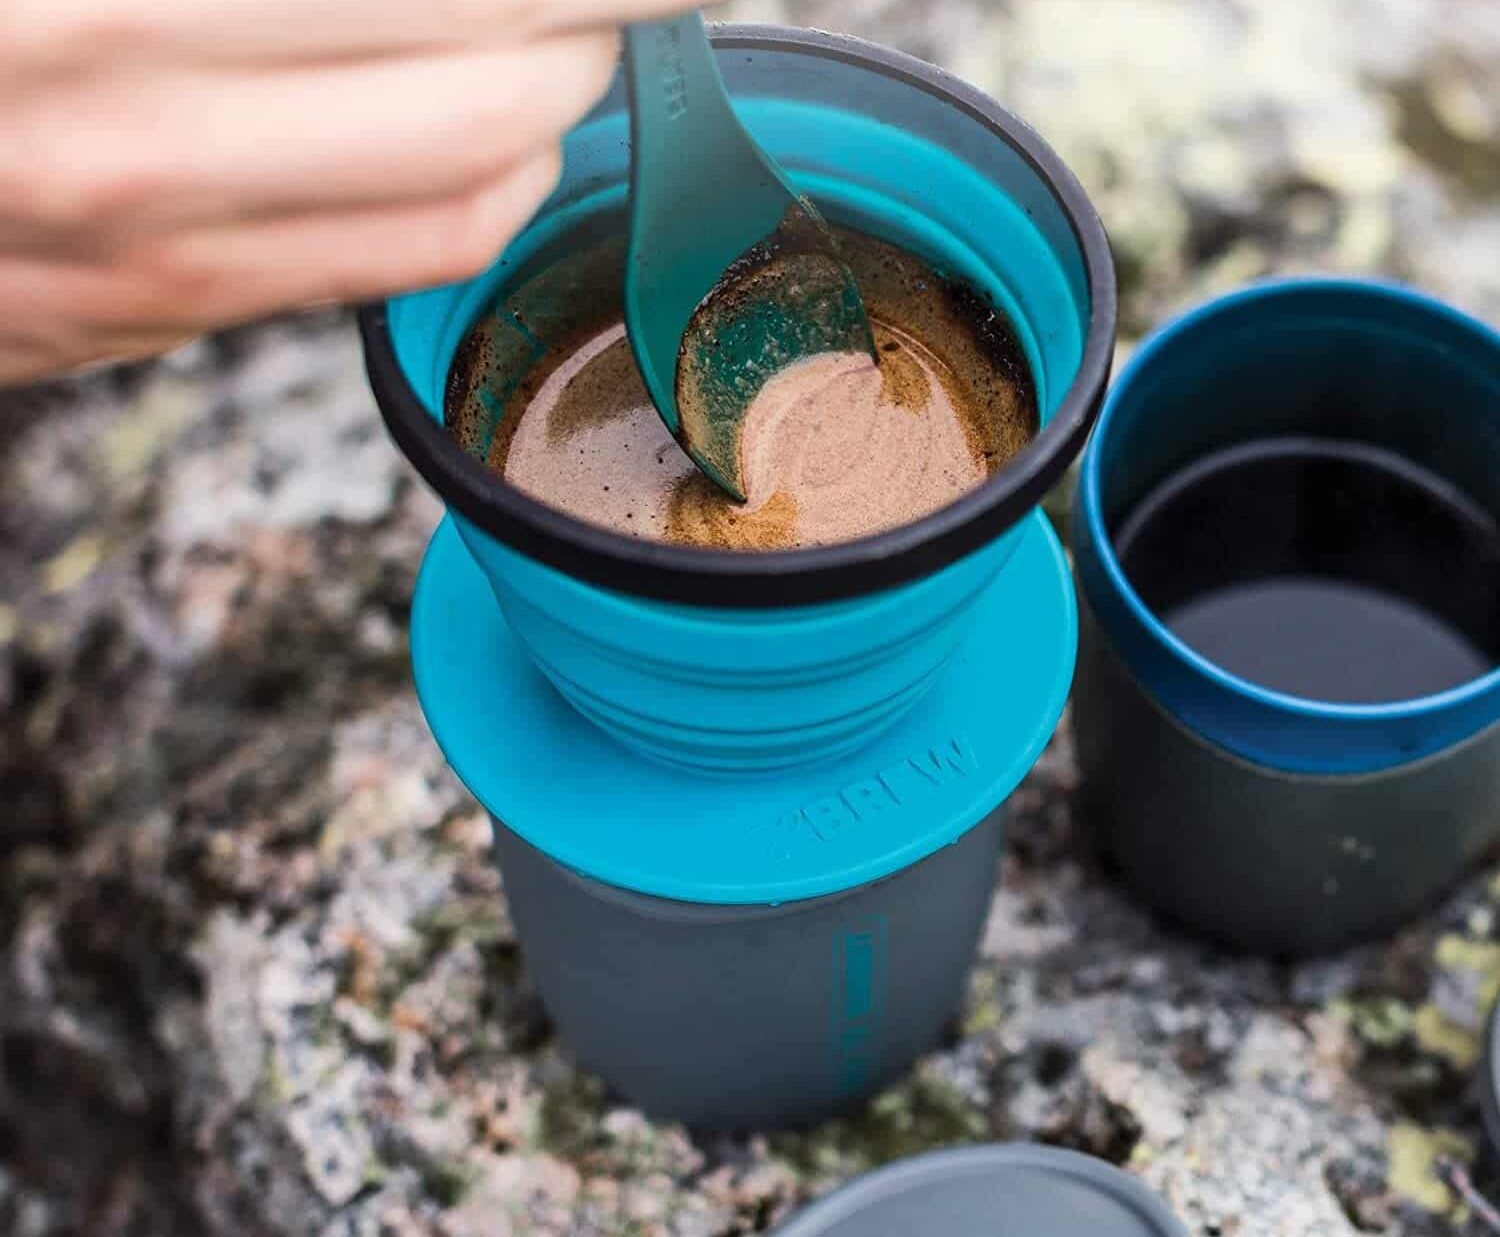 Sea to Summit X-Brew Collapsible Camping Coffee Dripper in use